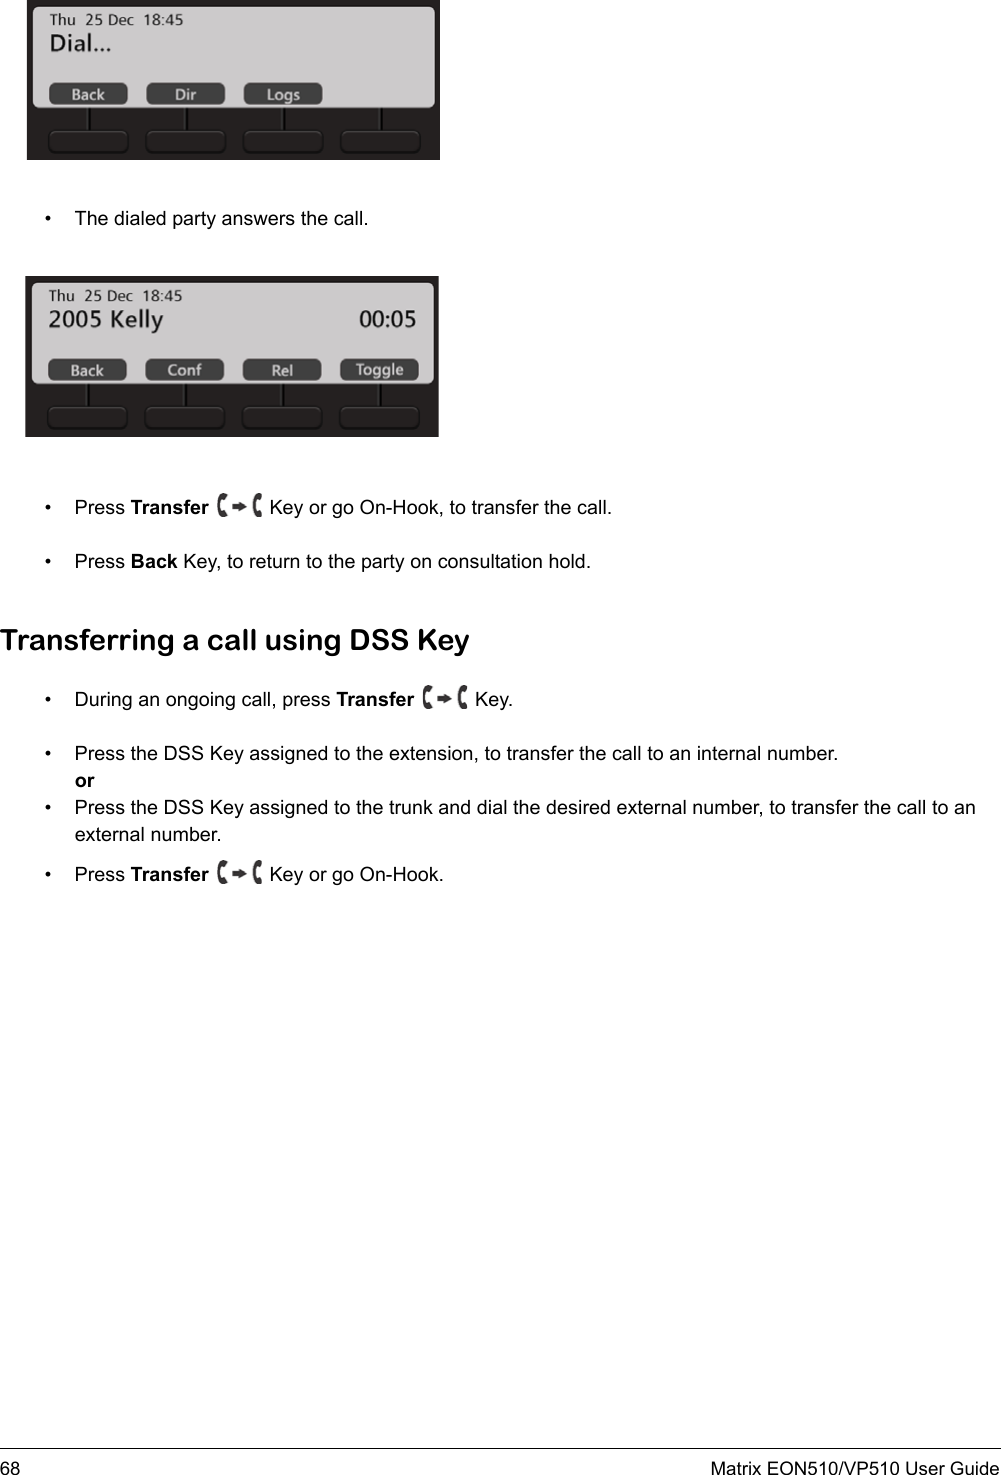 68 Matrix EON510/VP510 User Guide• The dialed party answers the call.• Press Transfer   Key or go On-Hook, to transfer the call.• Press Back Key, to return to the party on consultation hold.Transferring a call using DSS Key• During an ongoing call, press Transfer   Key.• Press the DSS Key assigned to the extension, to transfer the call to an internal number.or• Press the DSS Key assigned to the trunk and dial the desired external number, to transfer the call to an external number. • Press Transfer   Key or go On-Hook.